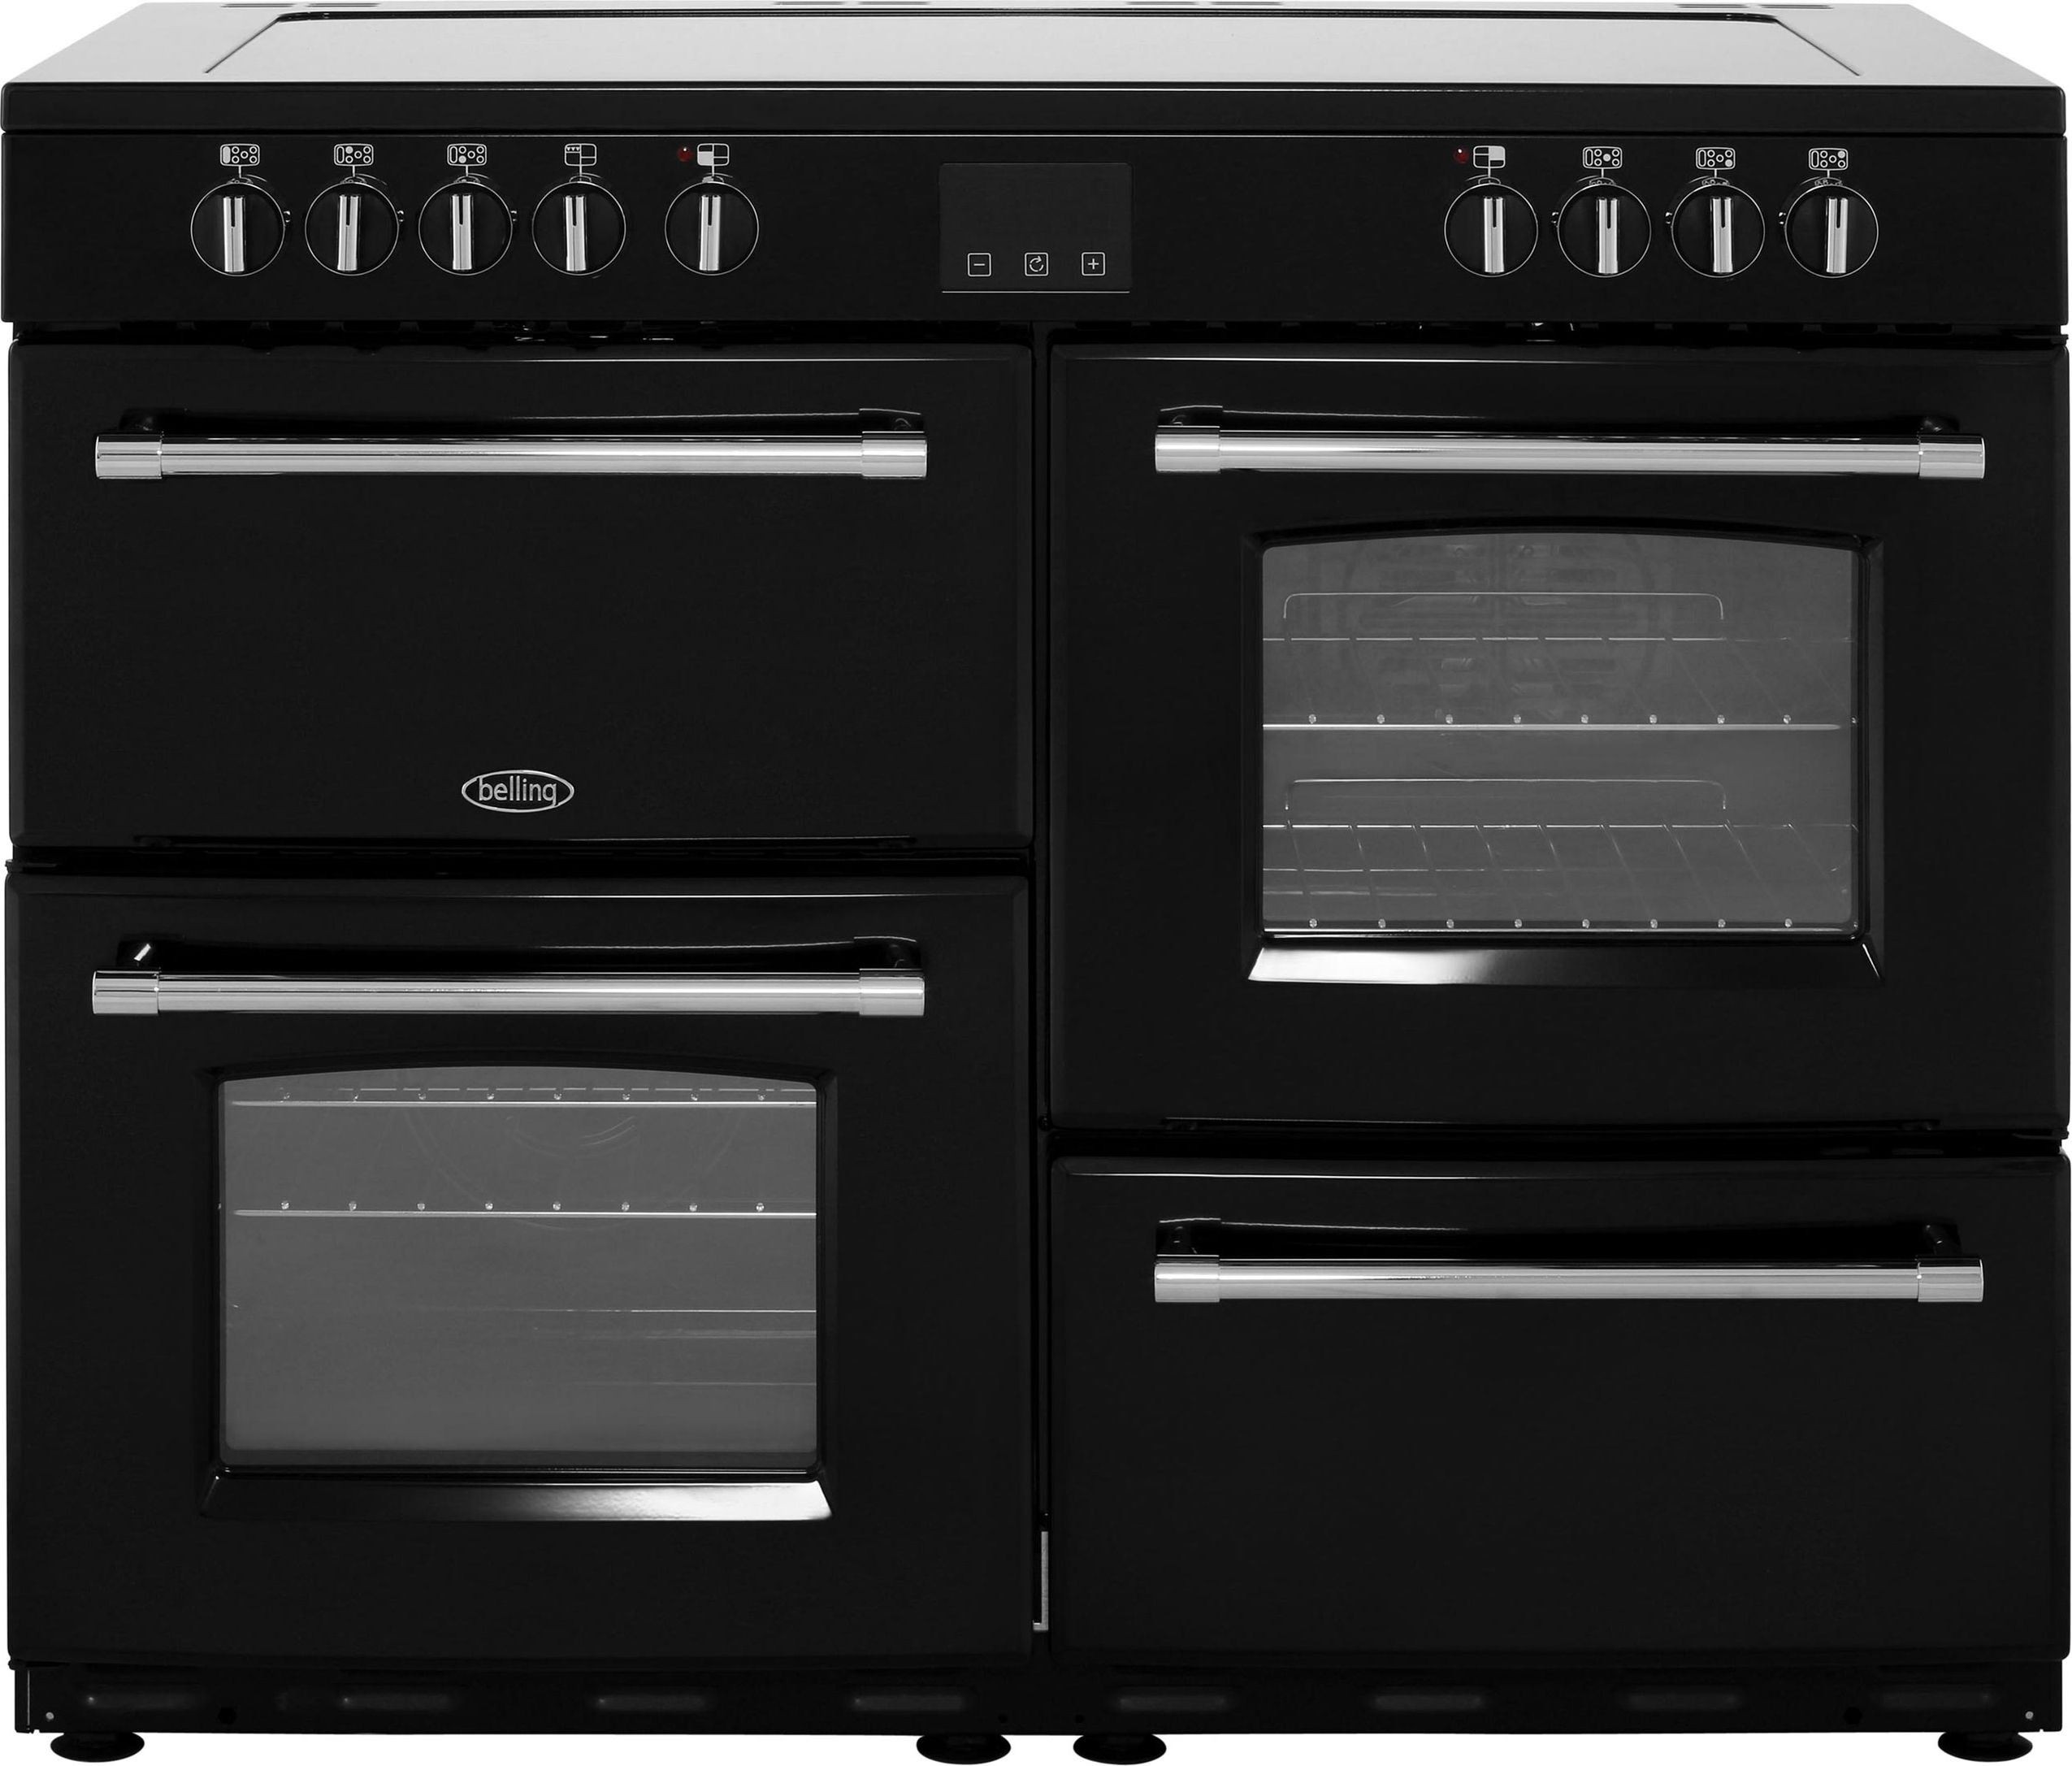 Belling Farmhouse110E 110cm Electric Range Cooker with Ceramic Hob - Black - A/A Rated, Black